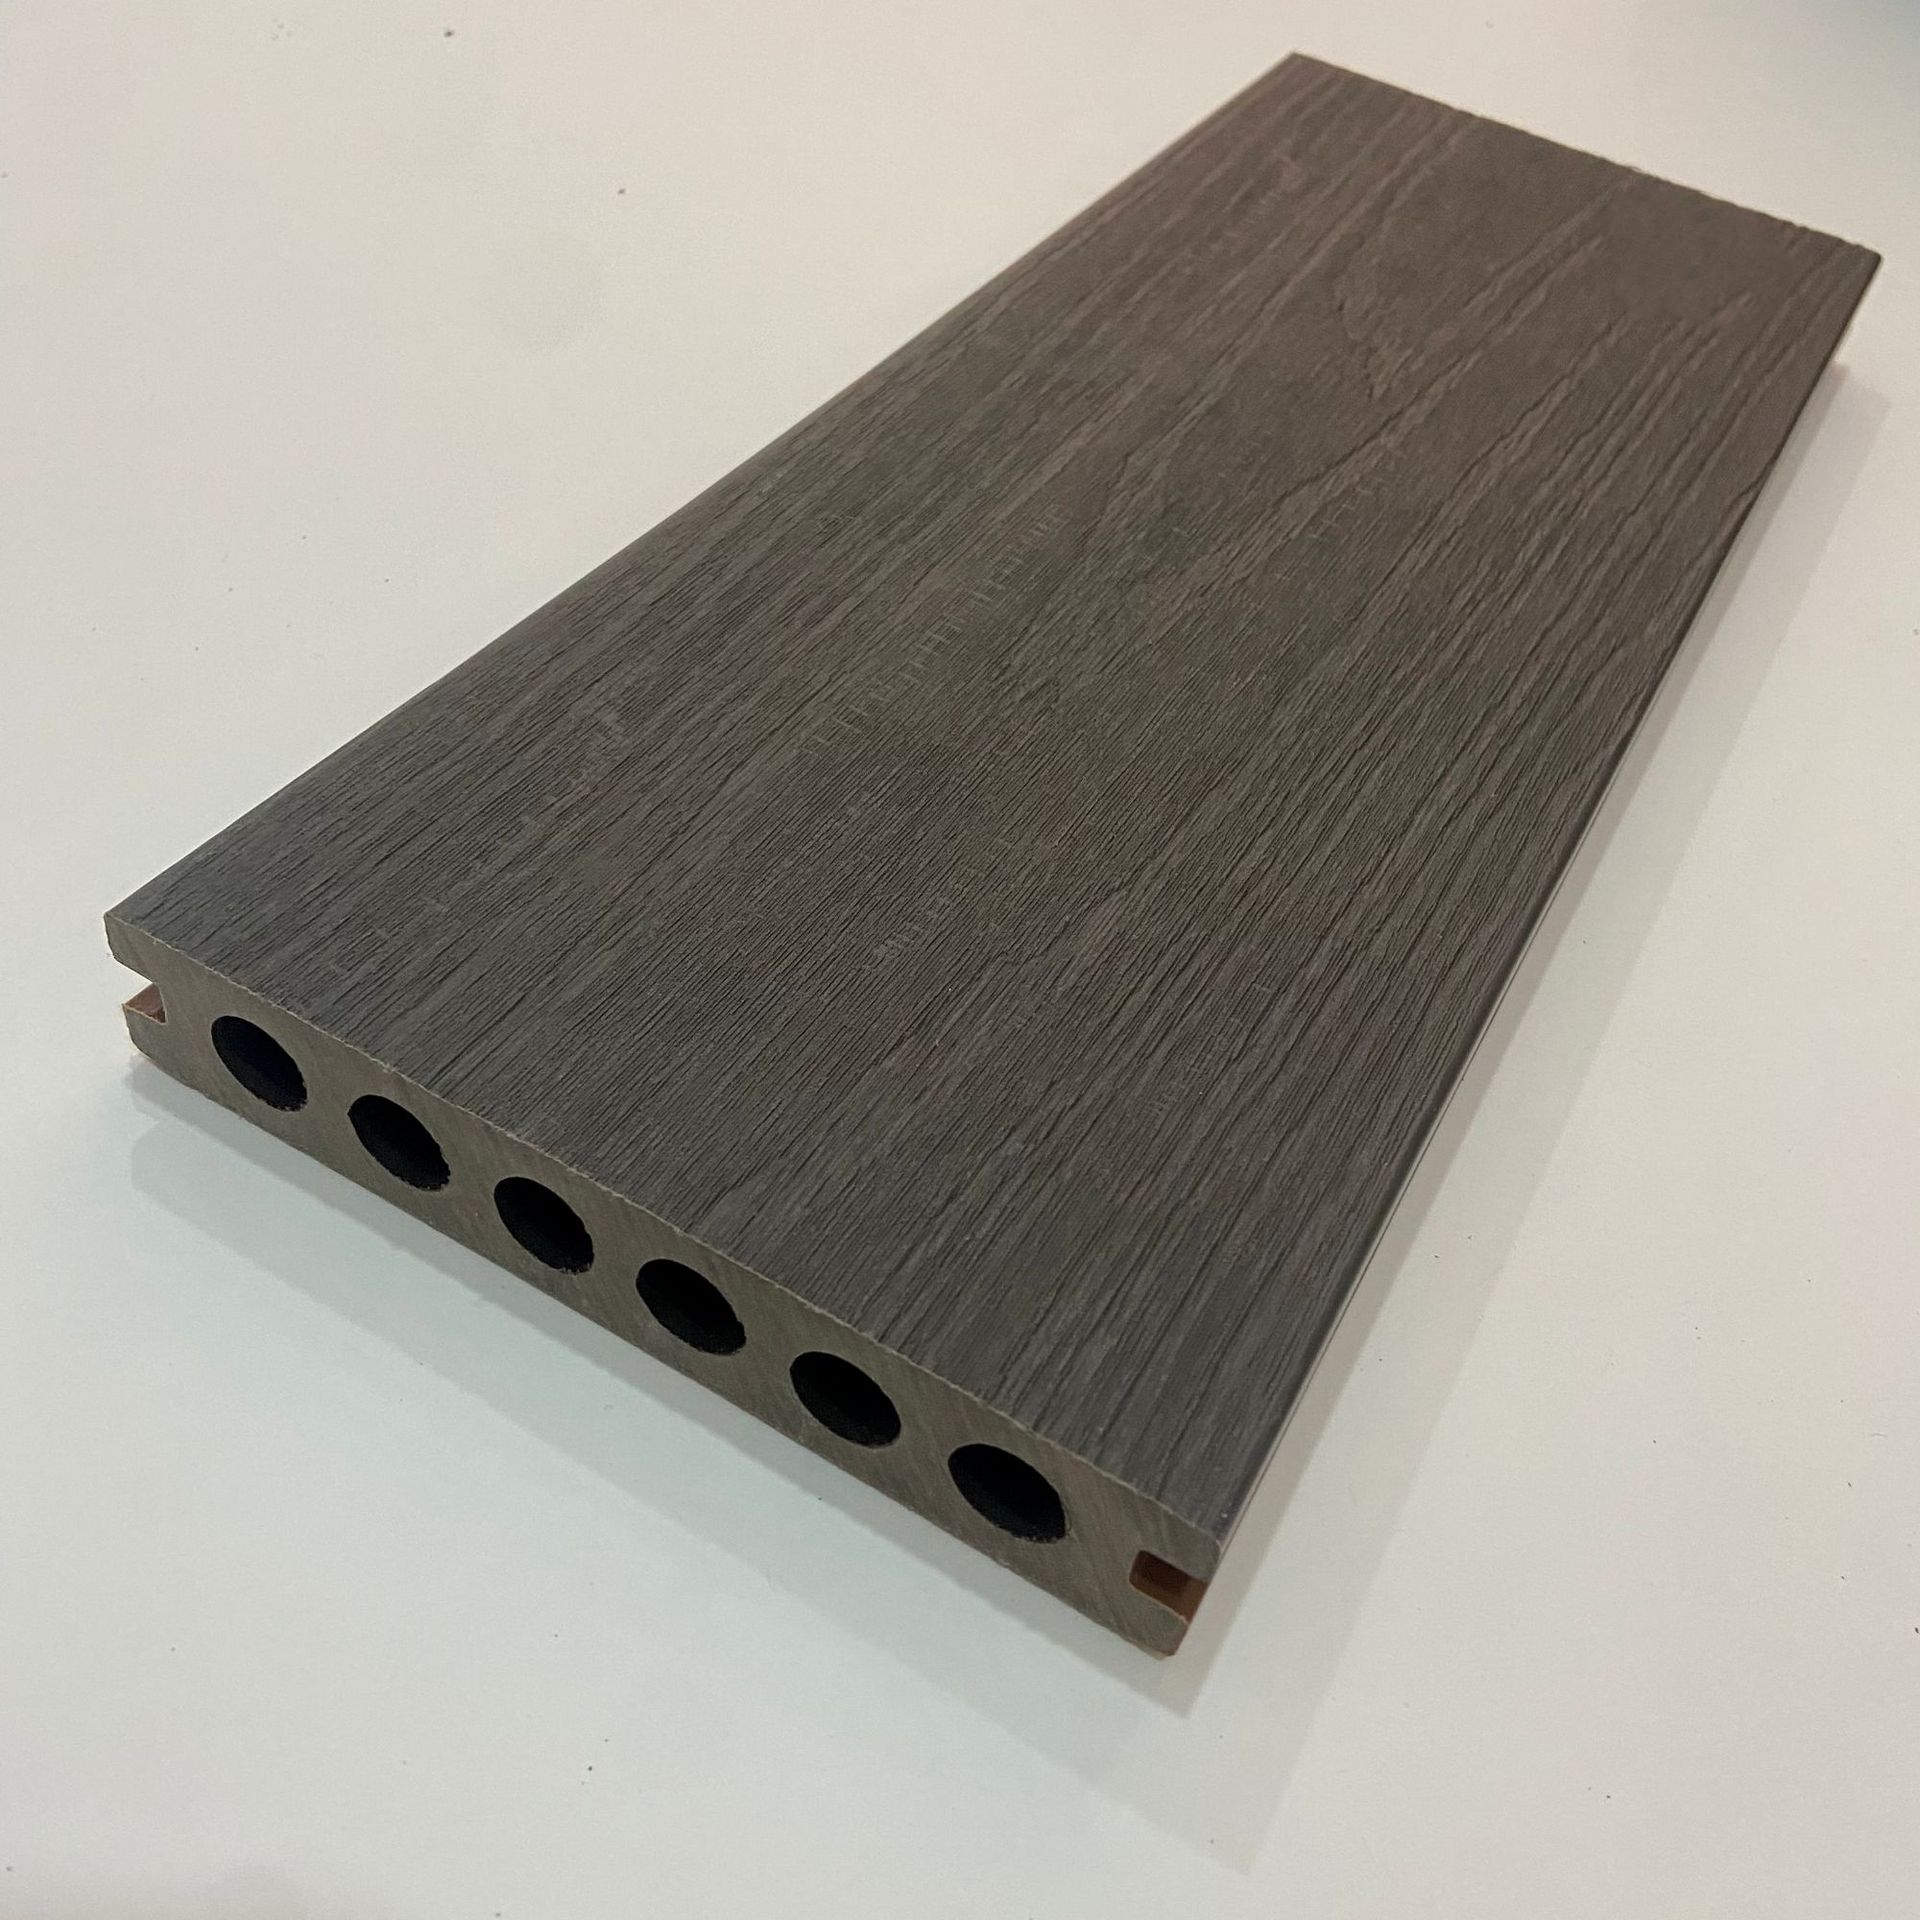 Supplier Multi Use Noise Absorbing Faux Wood Wpc Board Sheet Panel Flooring Tile Wpc Decking Board